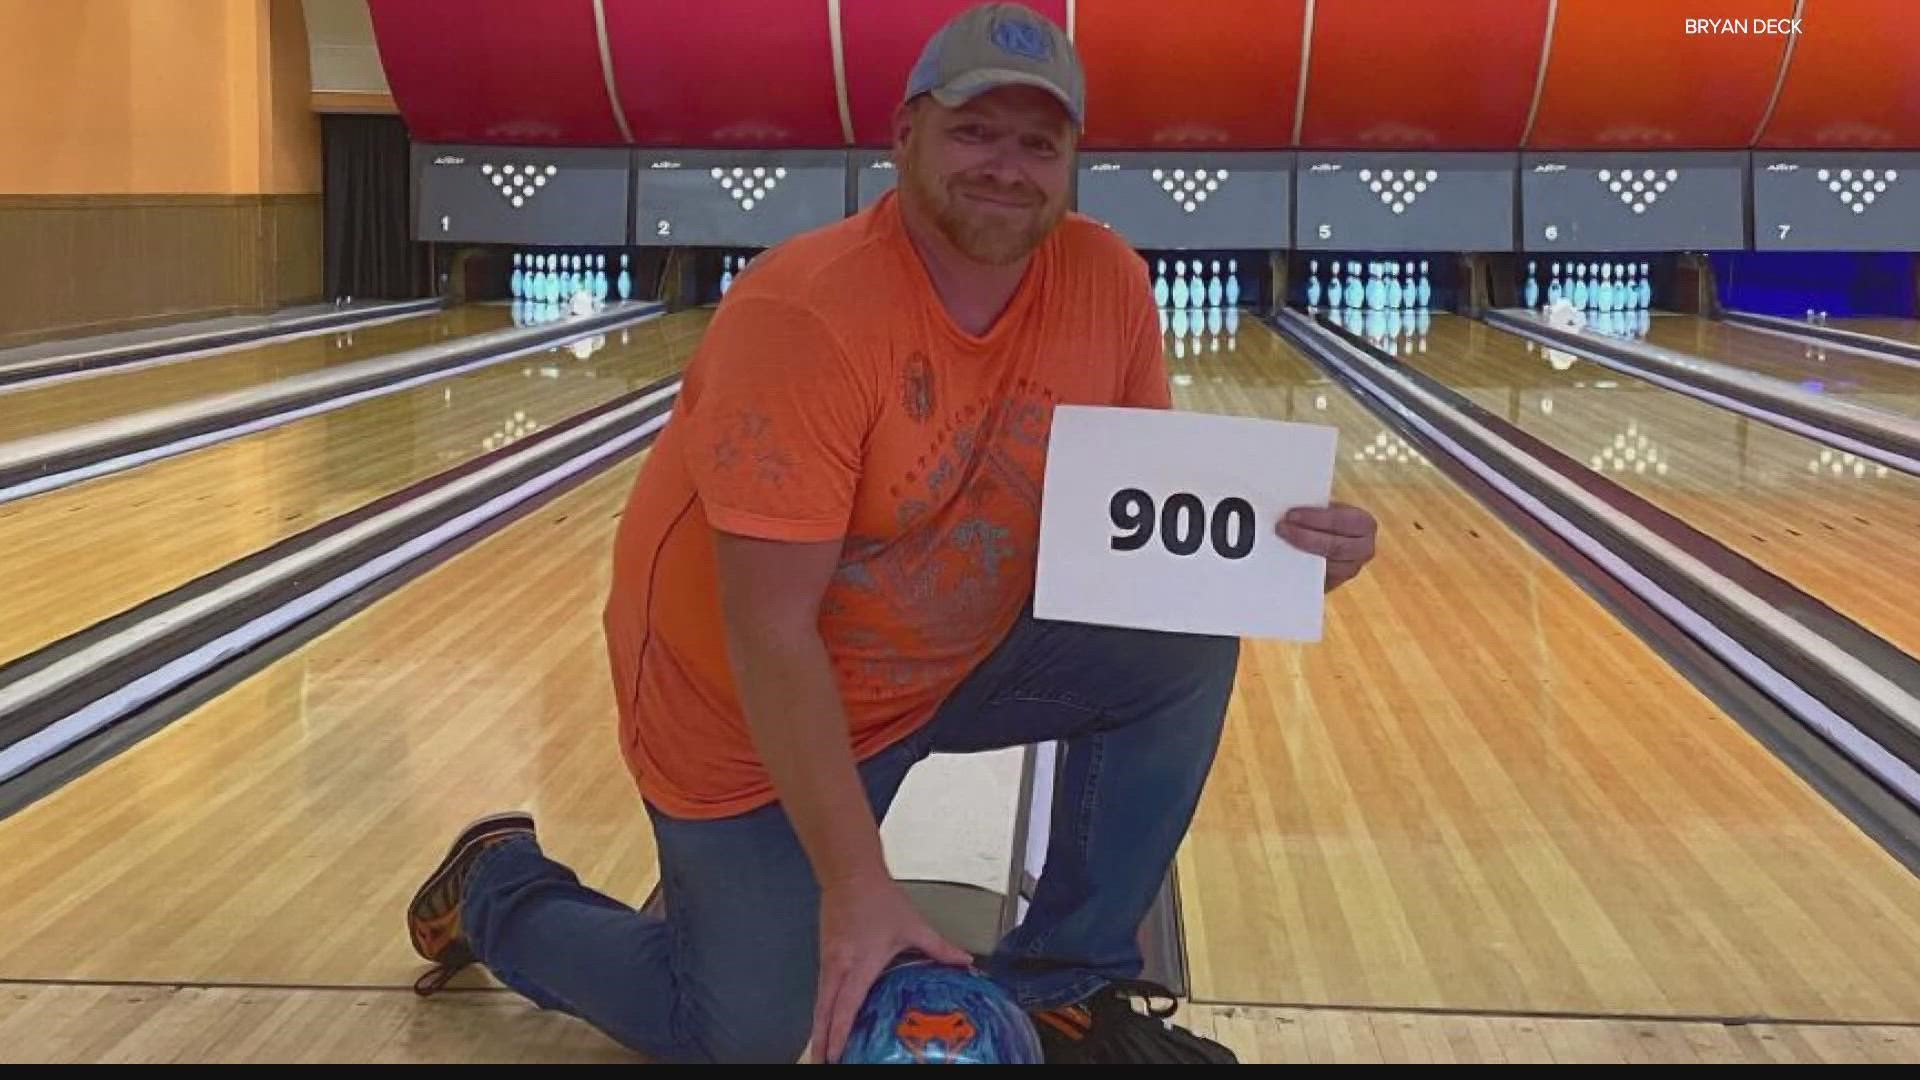 If you've gone bowling, you know how hard it is to bowl a 300 - a perfect game. One local bowler managed it!